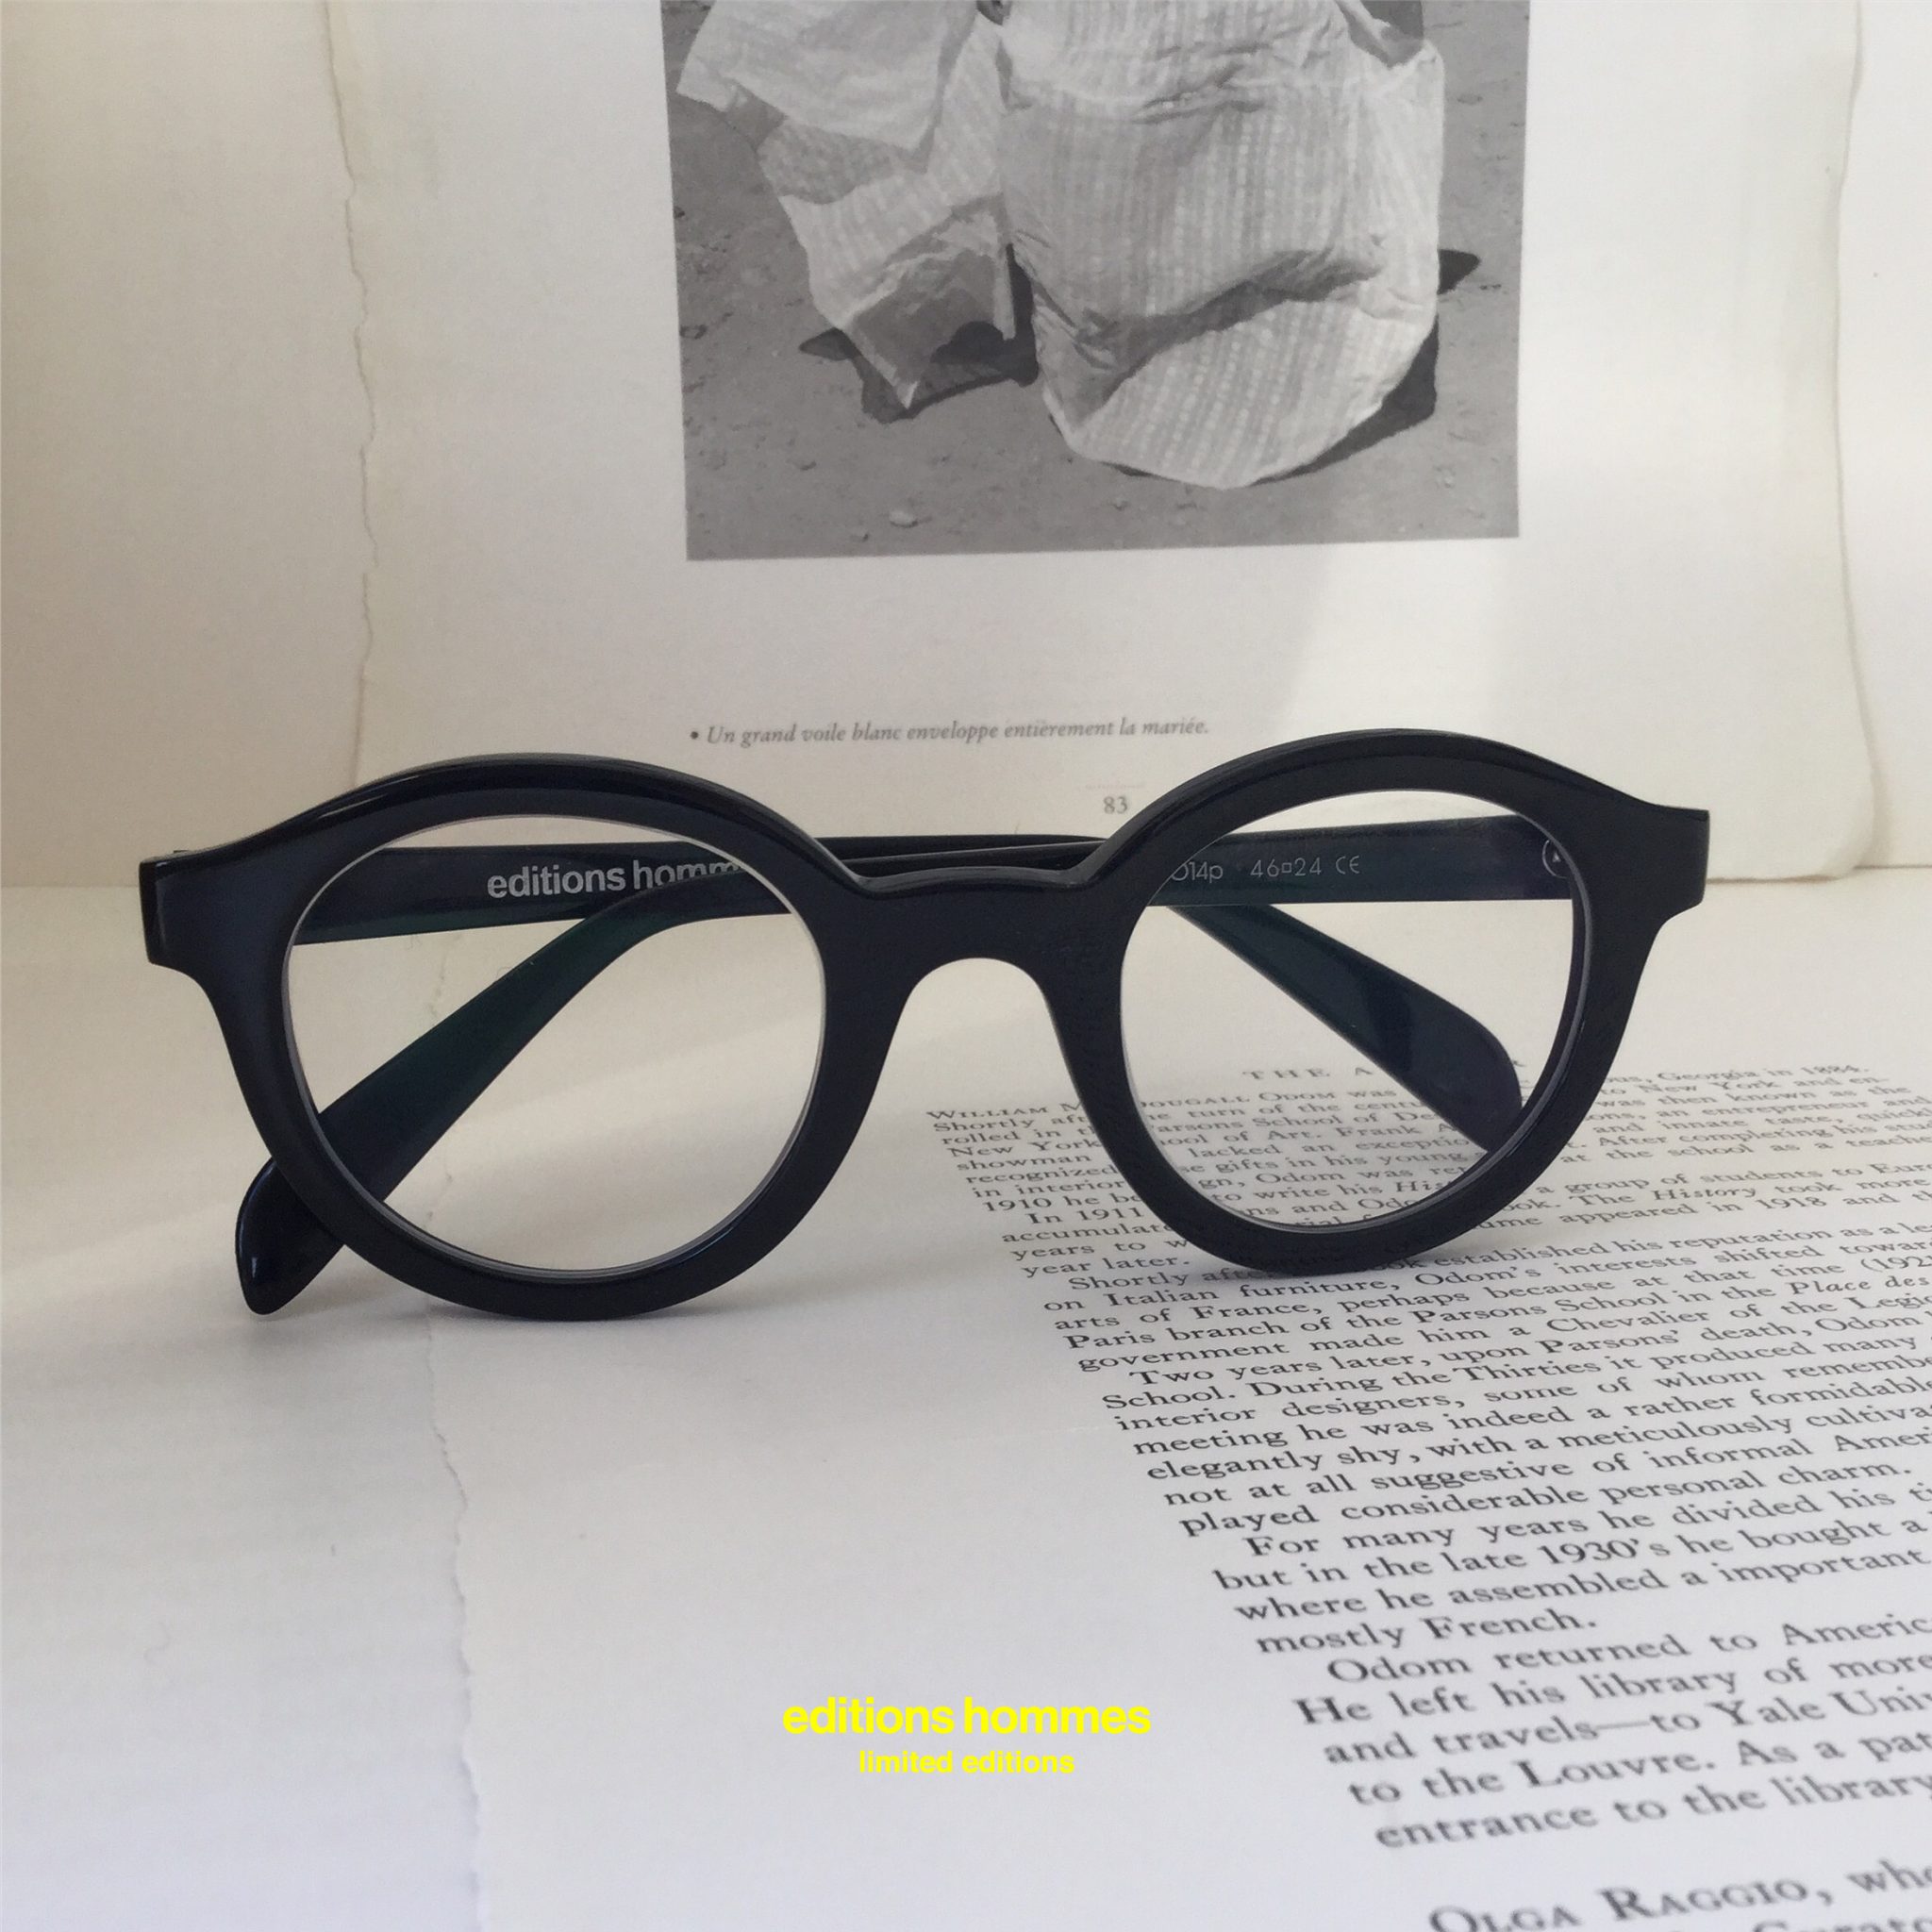 editions hommes horn spectacles 'Eclisse'